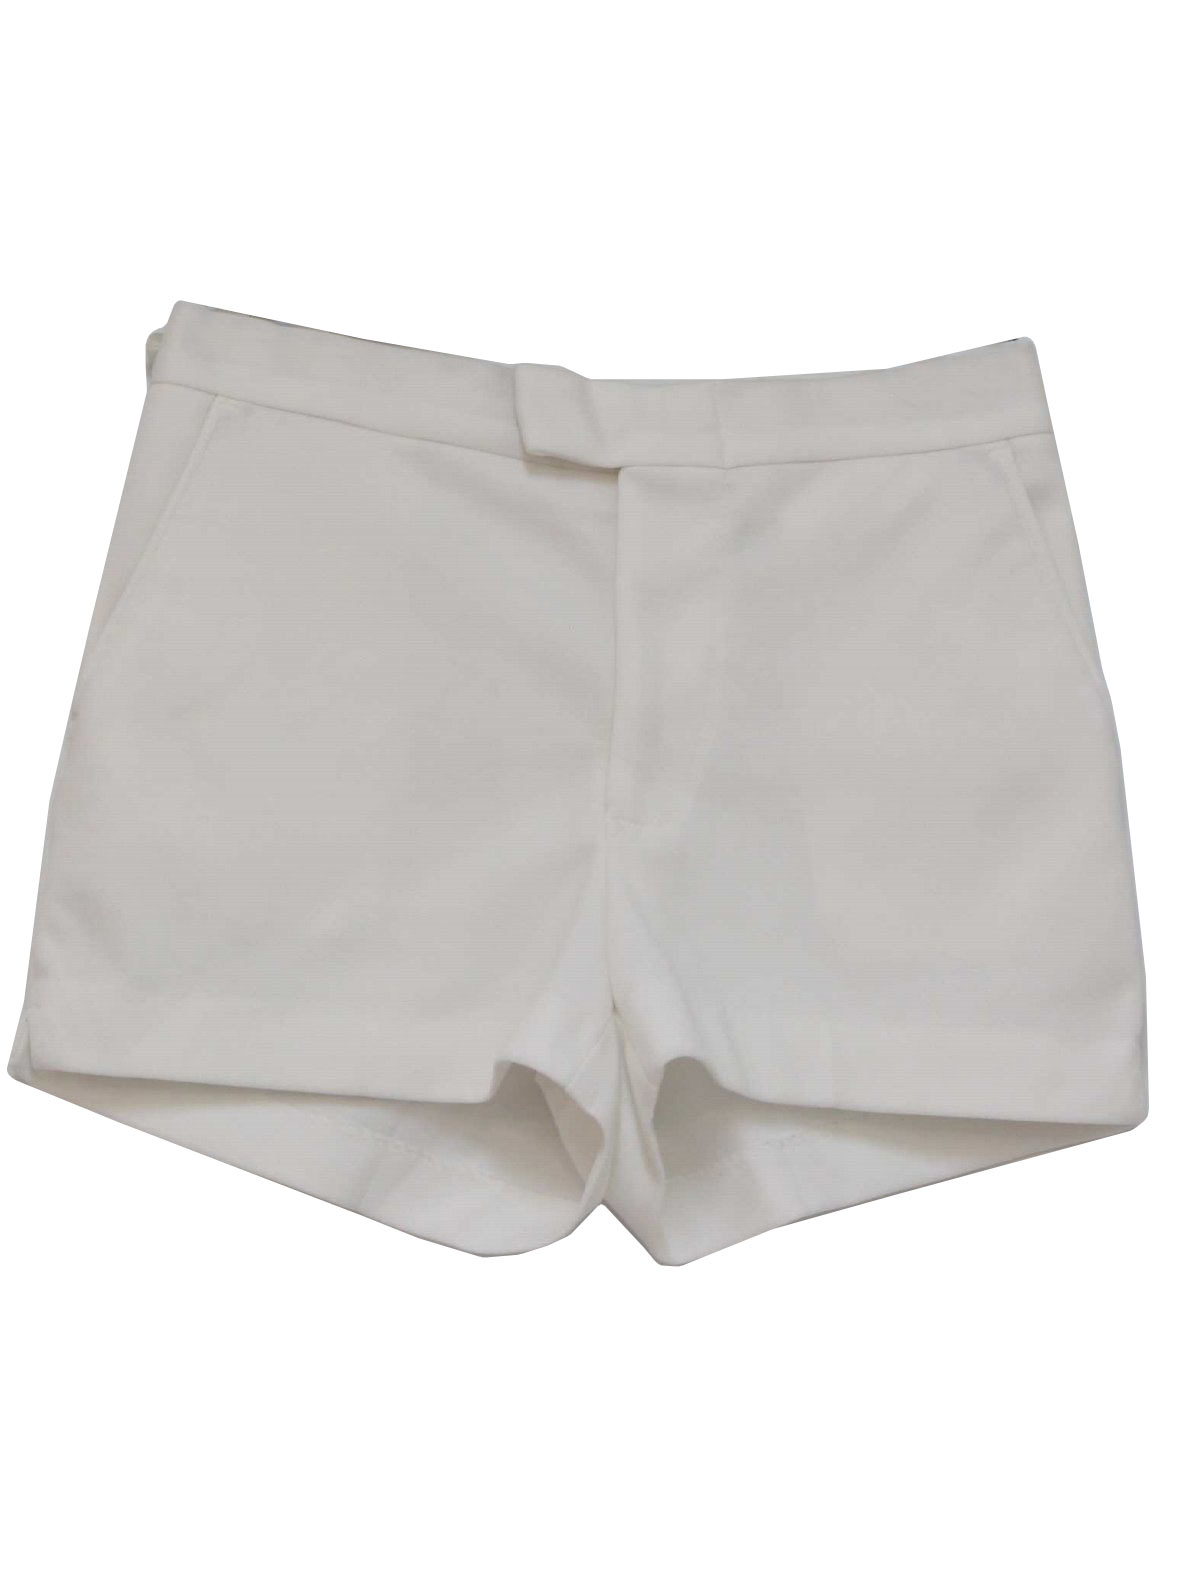 care Label 70's Vintage Shorts: 70s -care Label- Mens white polyester ...